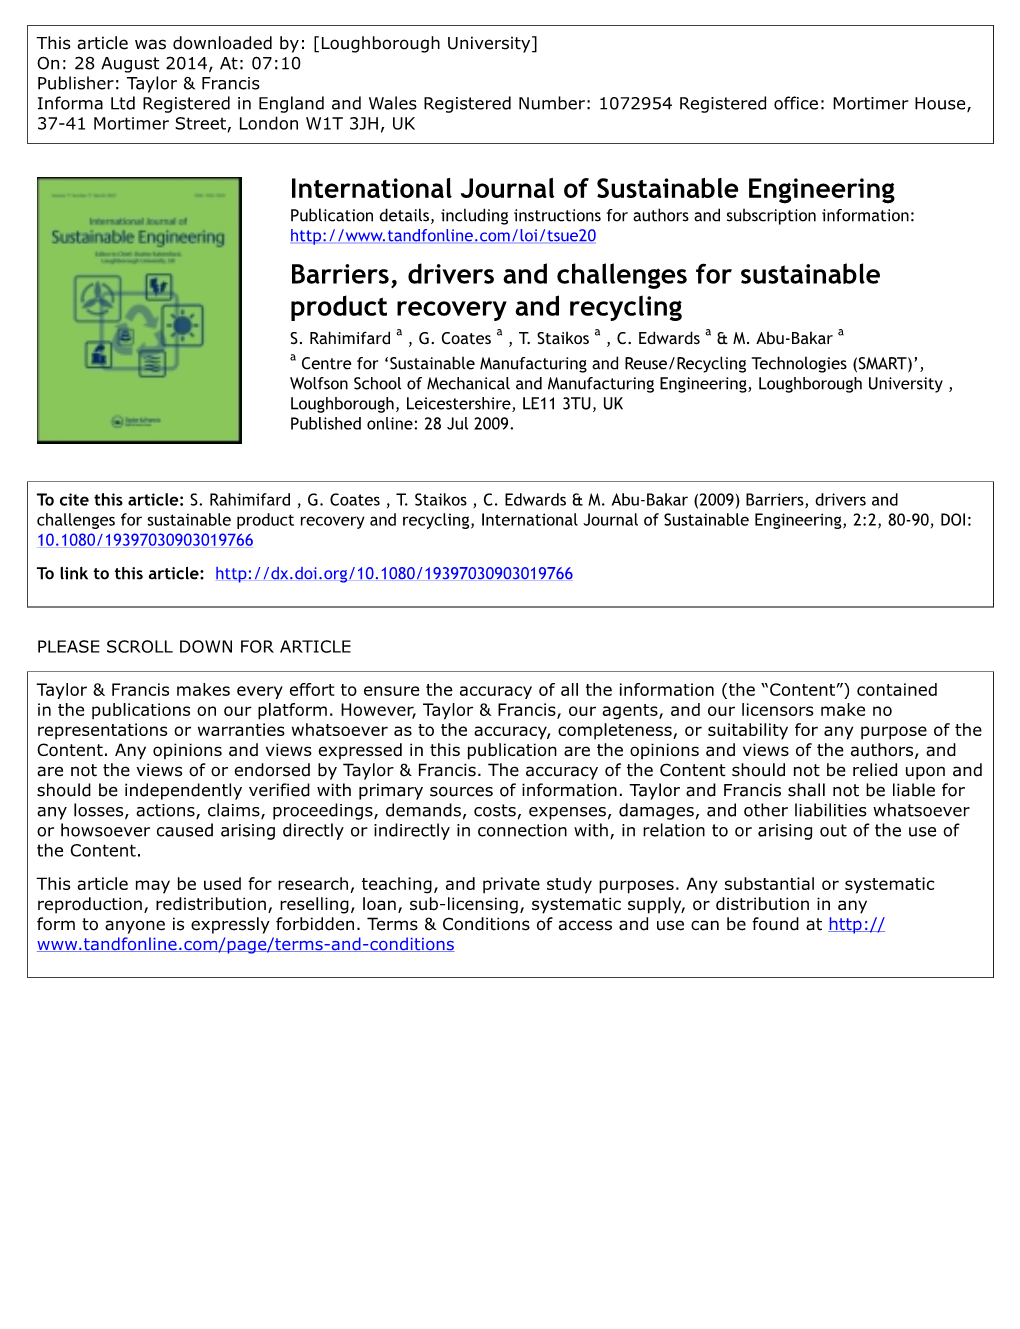 International Journal of Sustainable Engineering Barriers, Drivers And